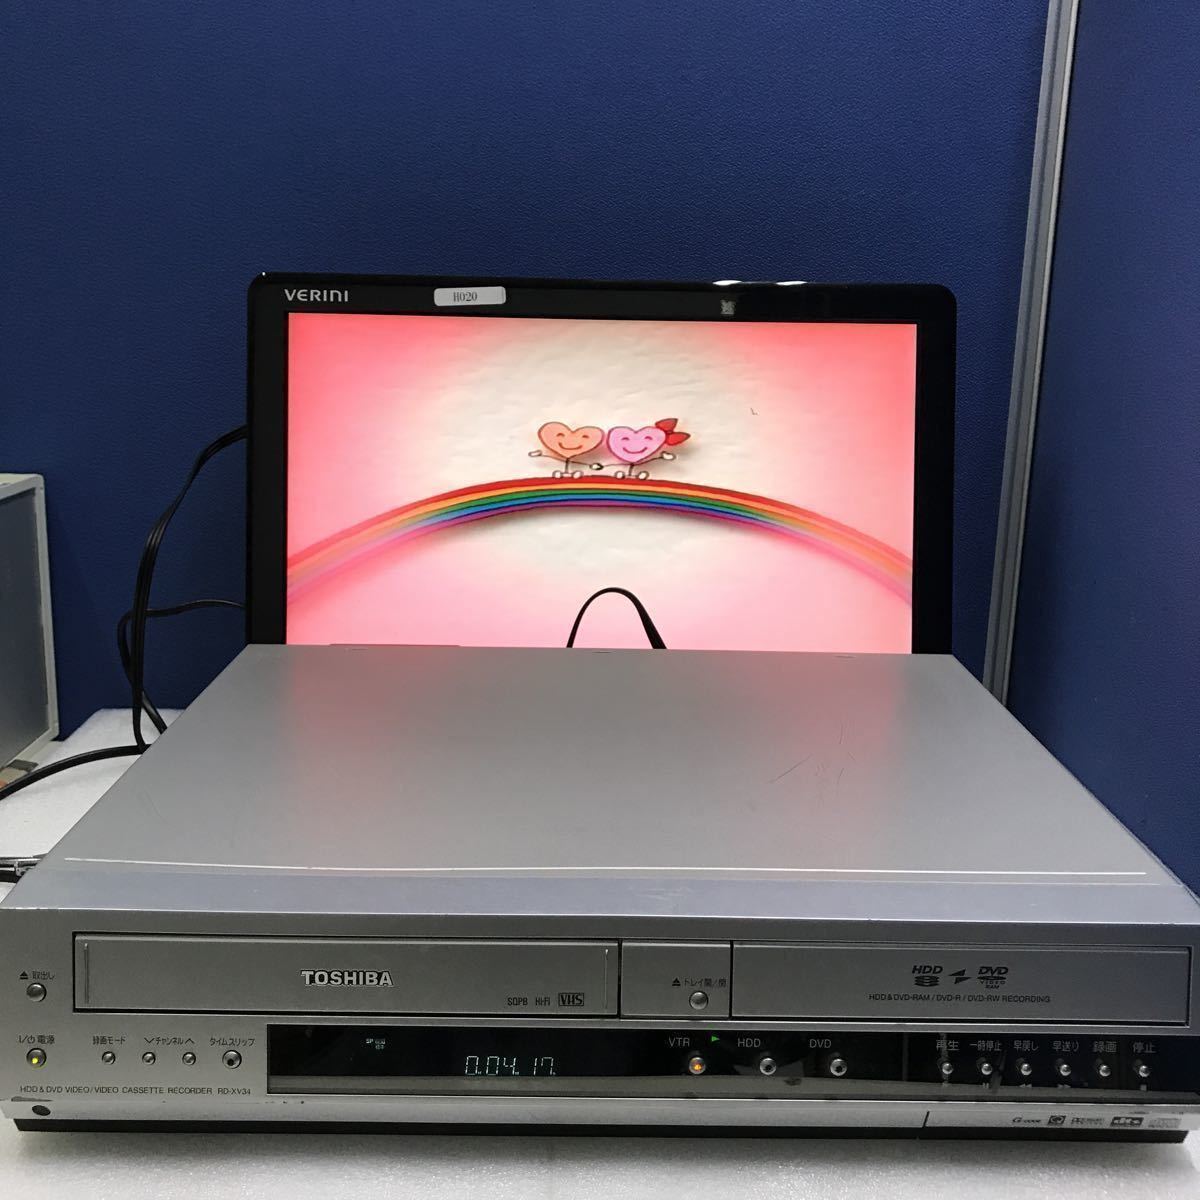 XL8271 Toshiba RD-XV34 VHS DVD HDD dubbing deck body only video |DVD reproduction OK remote control not therefore the first period setting is not possible present condition goods 